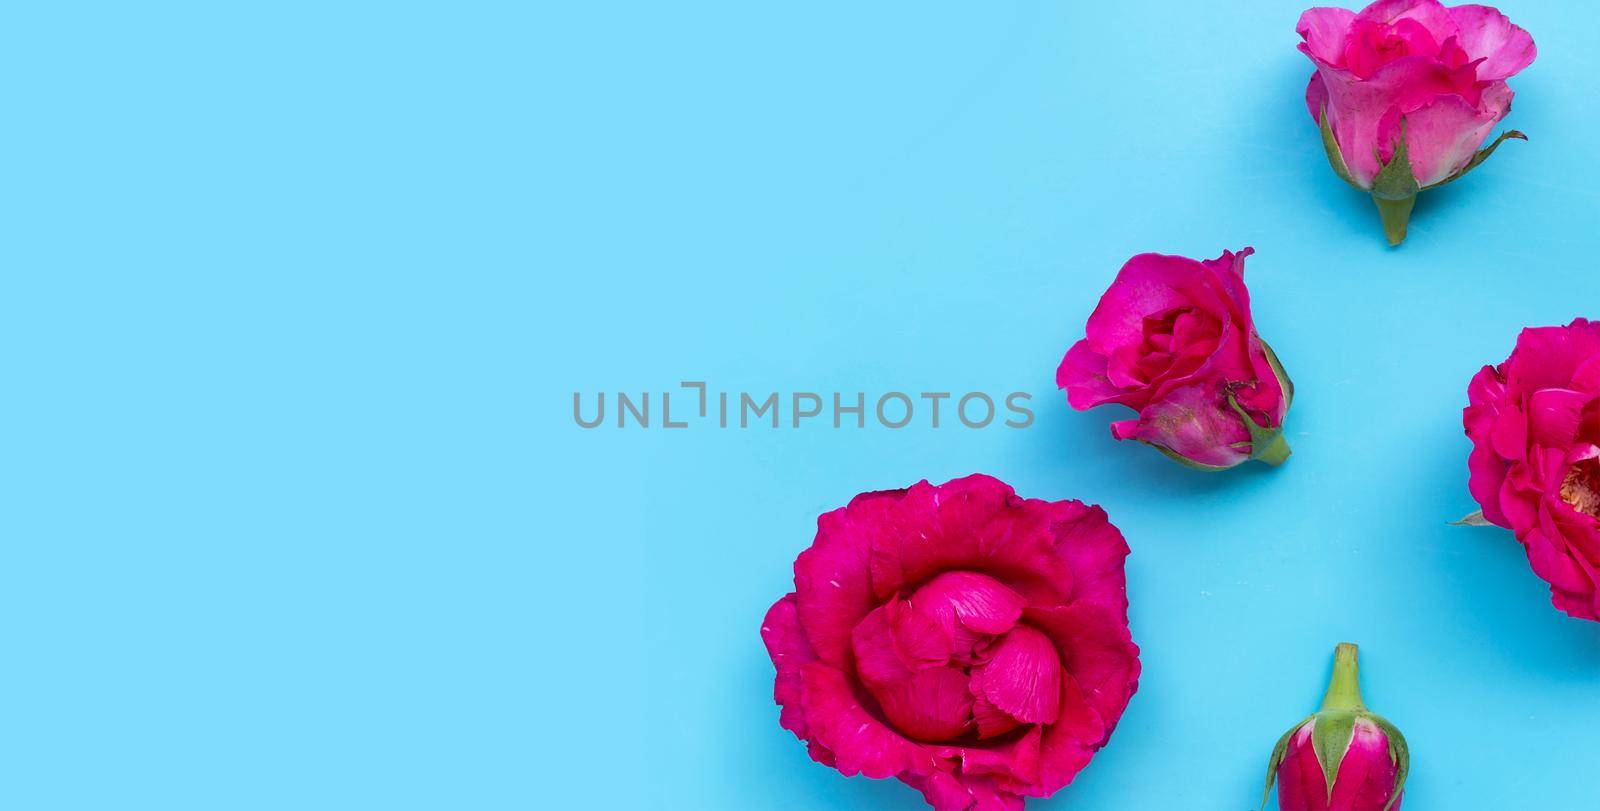 Rose on blue background. Top view